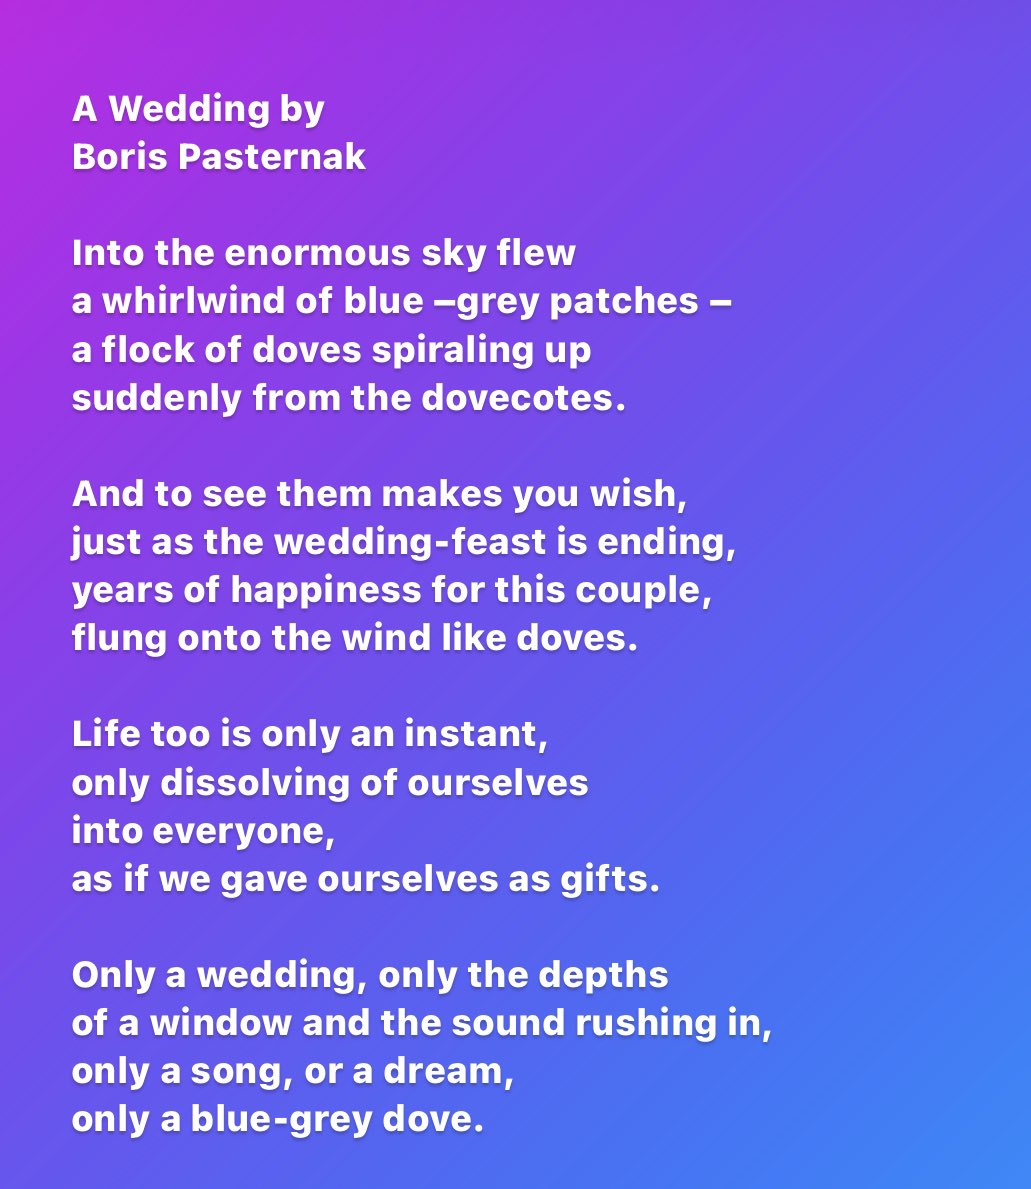 Second of three poems performed this week at @lcmexams in Glasgow. Our student’s strong performance of Boris Pasternak’s ‘A Wedding’, secured her a Grade 6 Speech & Drama qualification! #speakwithconfidence #speechanddrama #weddingpoetry #pasternak 💪👏🎭🏴󠁧󠁢󠁳󠁣󠁴󠁿👏